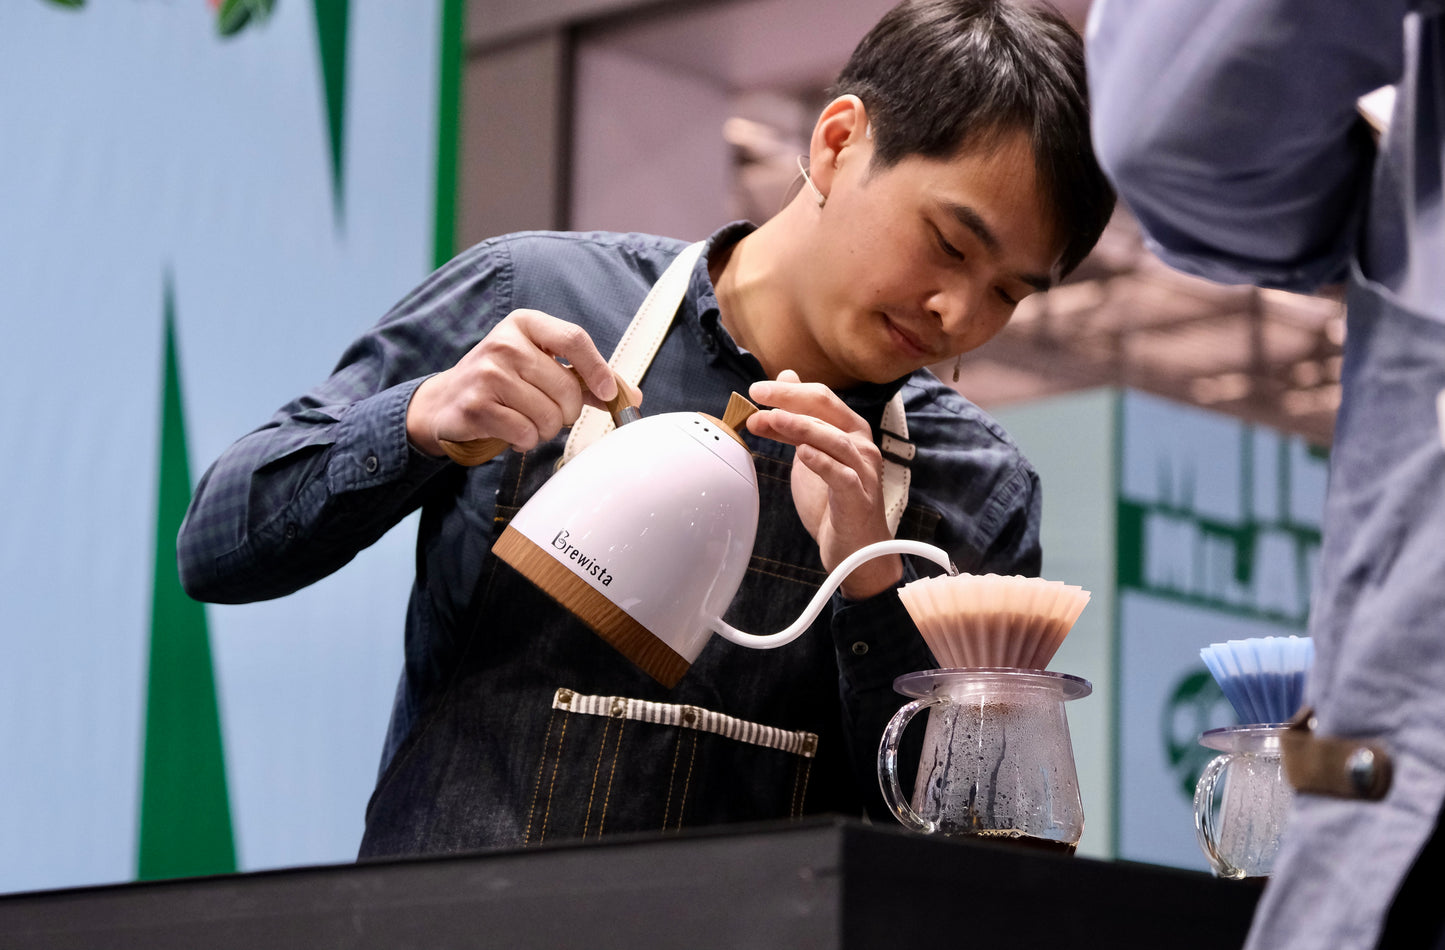 Ply using the Origami Air S in Milan Italy for the World Brewers Cup